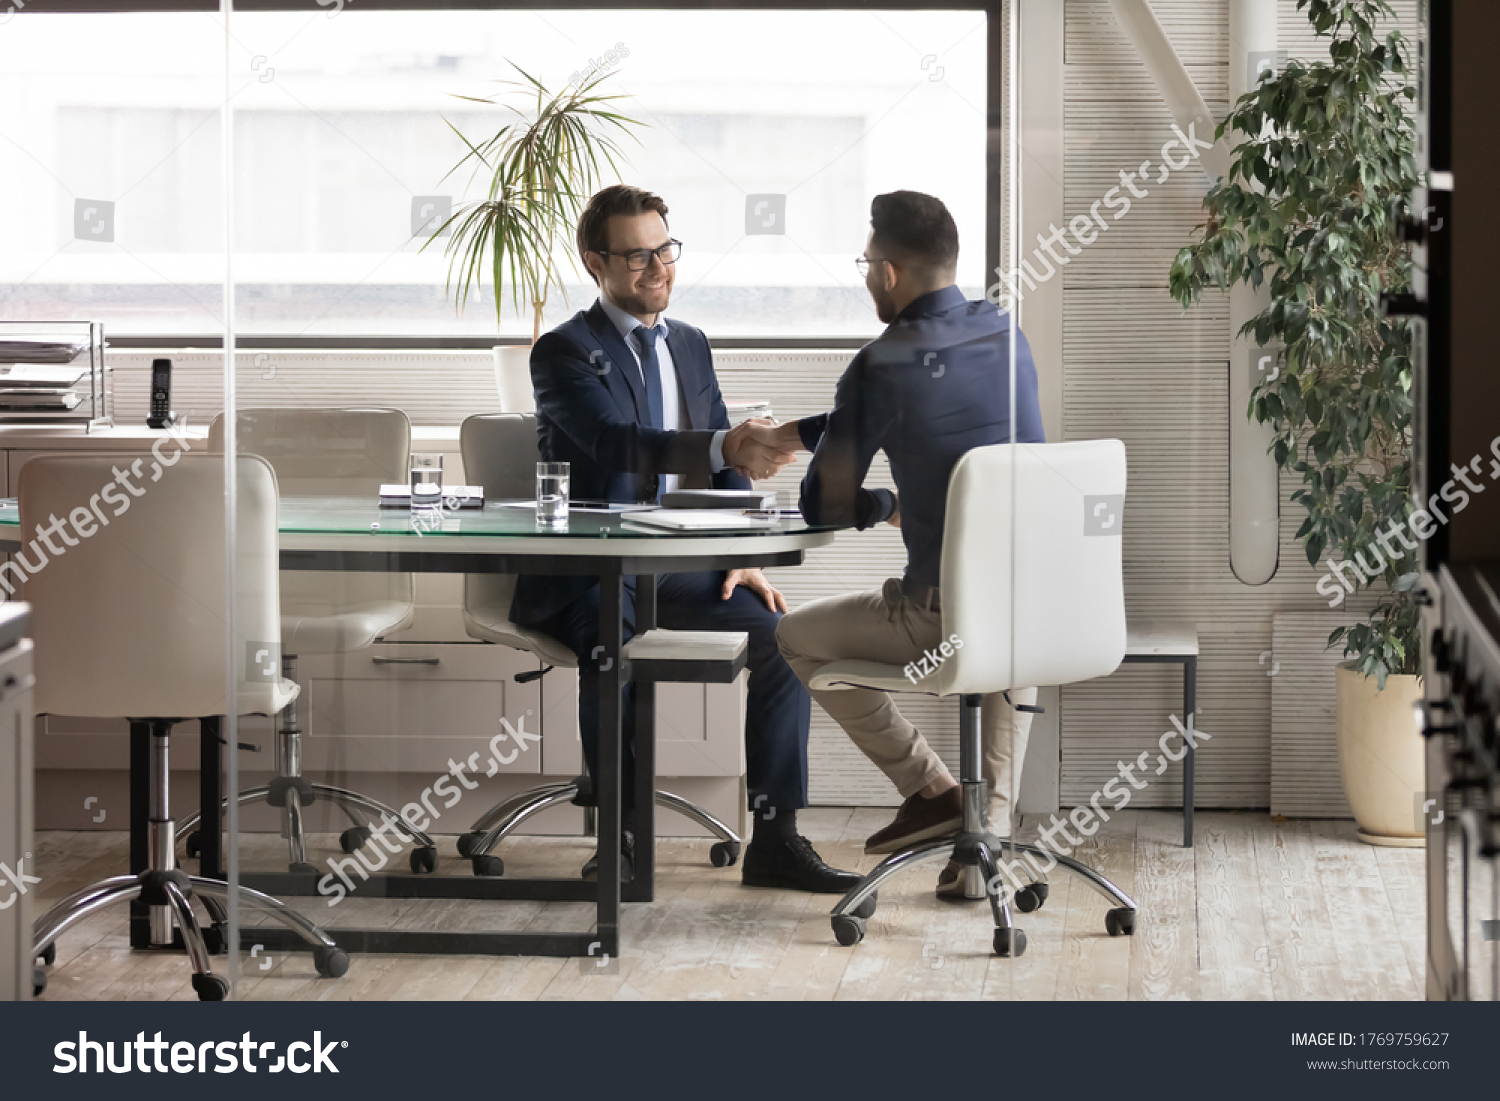 Smiling multiracial young businessmen handshake greeting get acquainted at boardroom briefing, excited diverse male business partners shake hands make agreement after successful office negotiations #1769759627